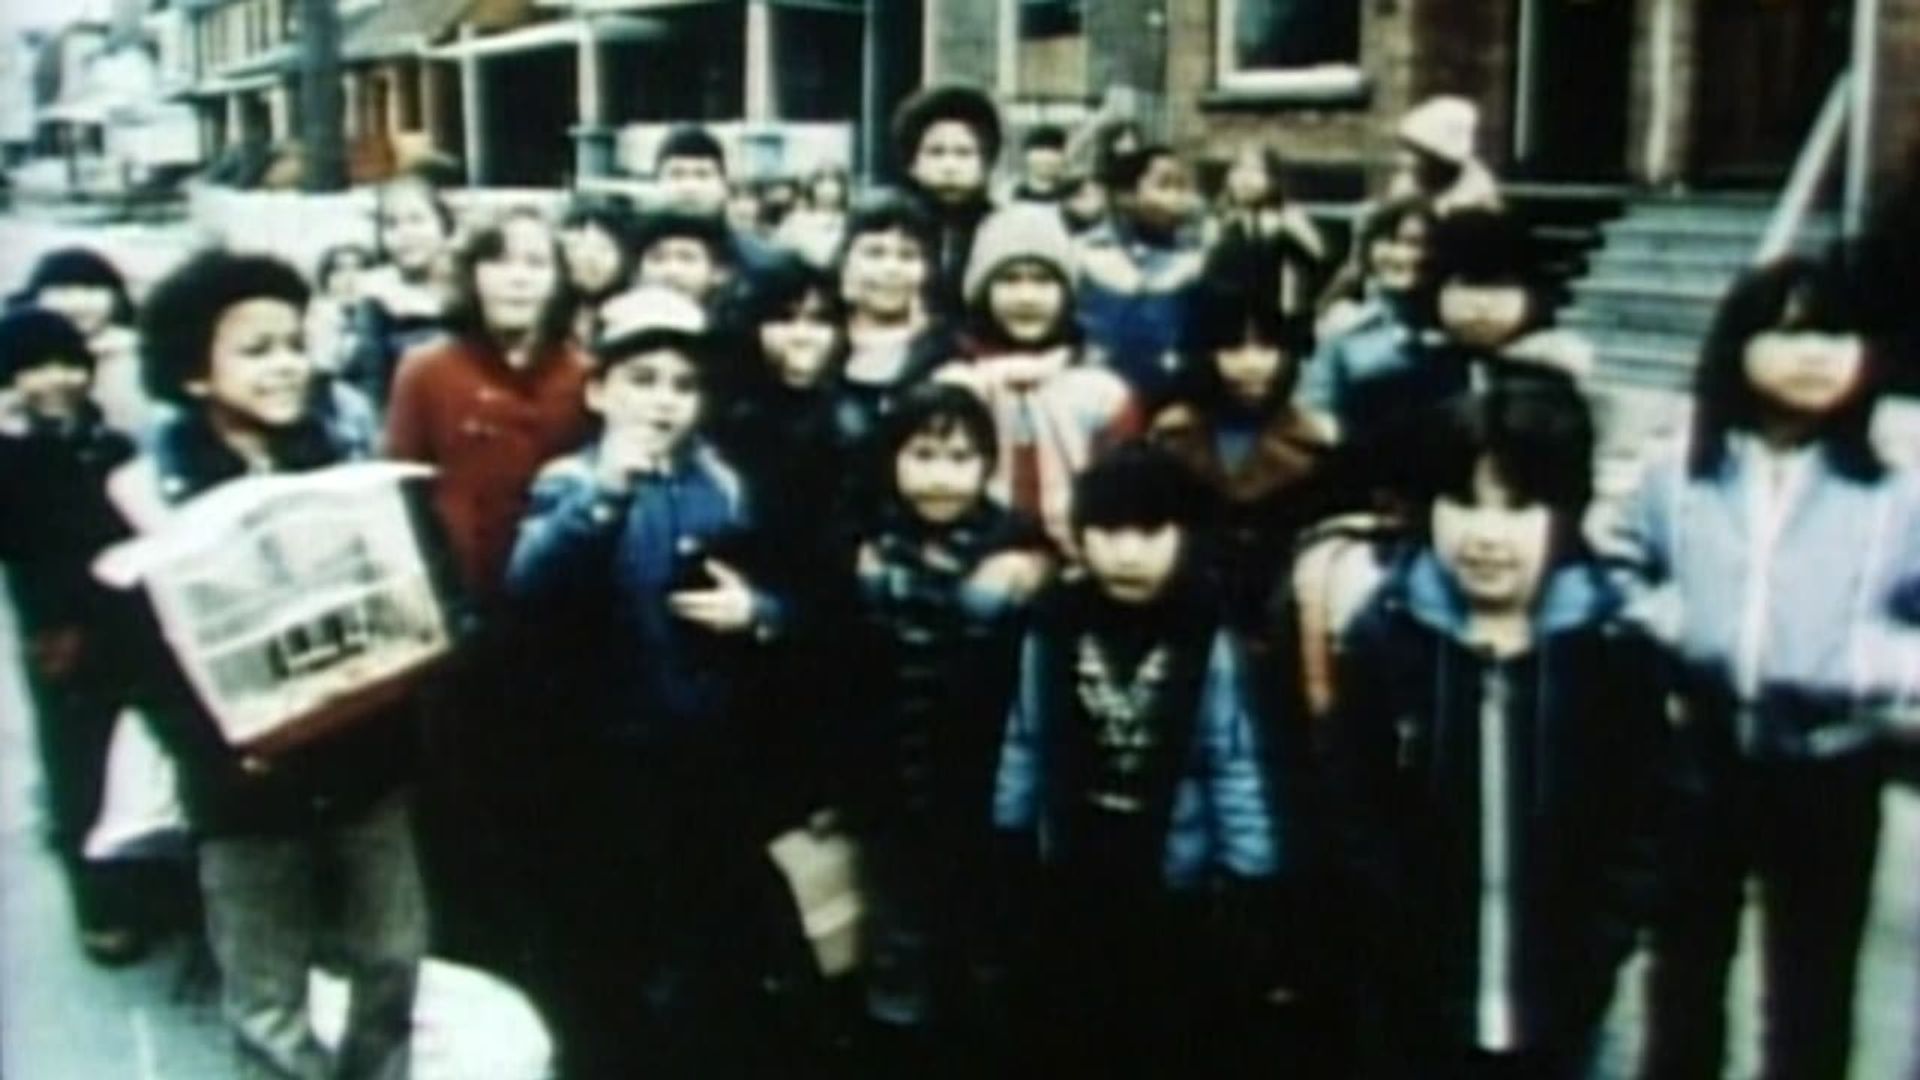 The Kids of Degrassi Street background